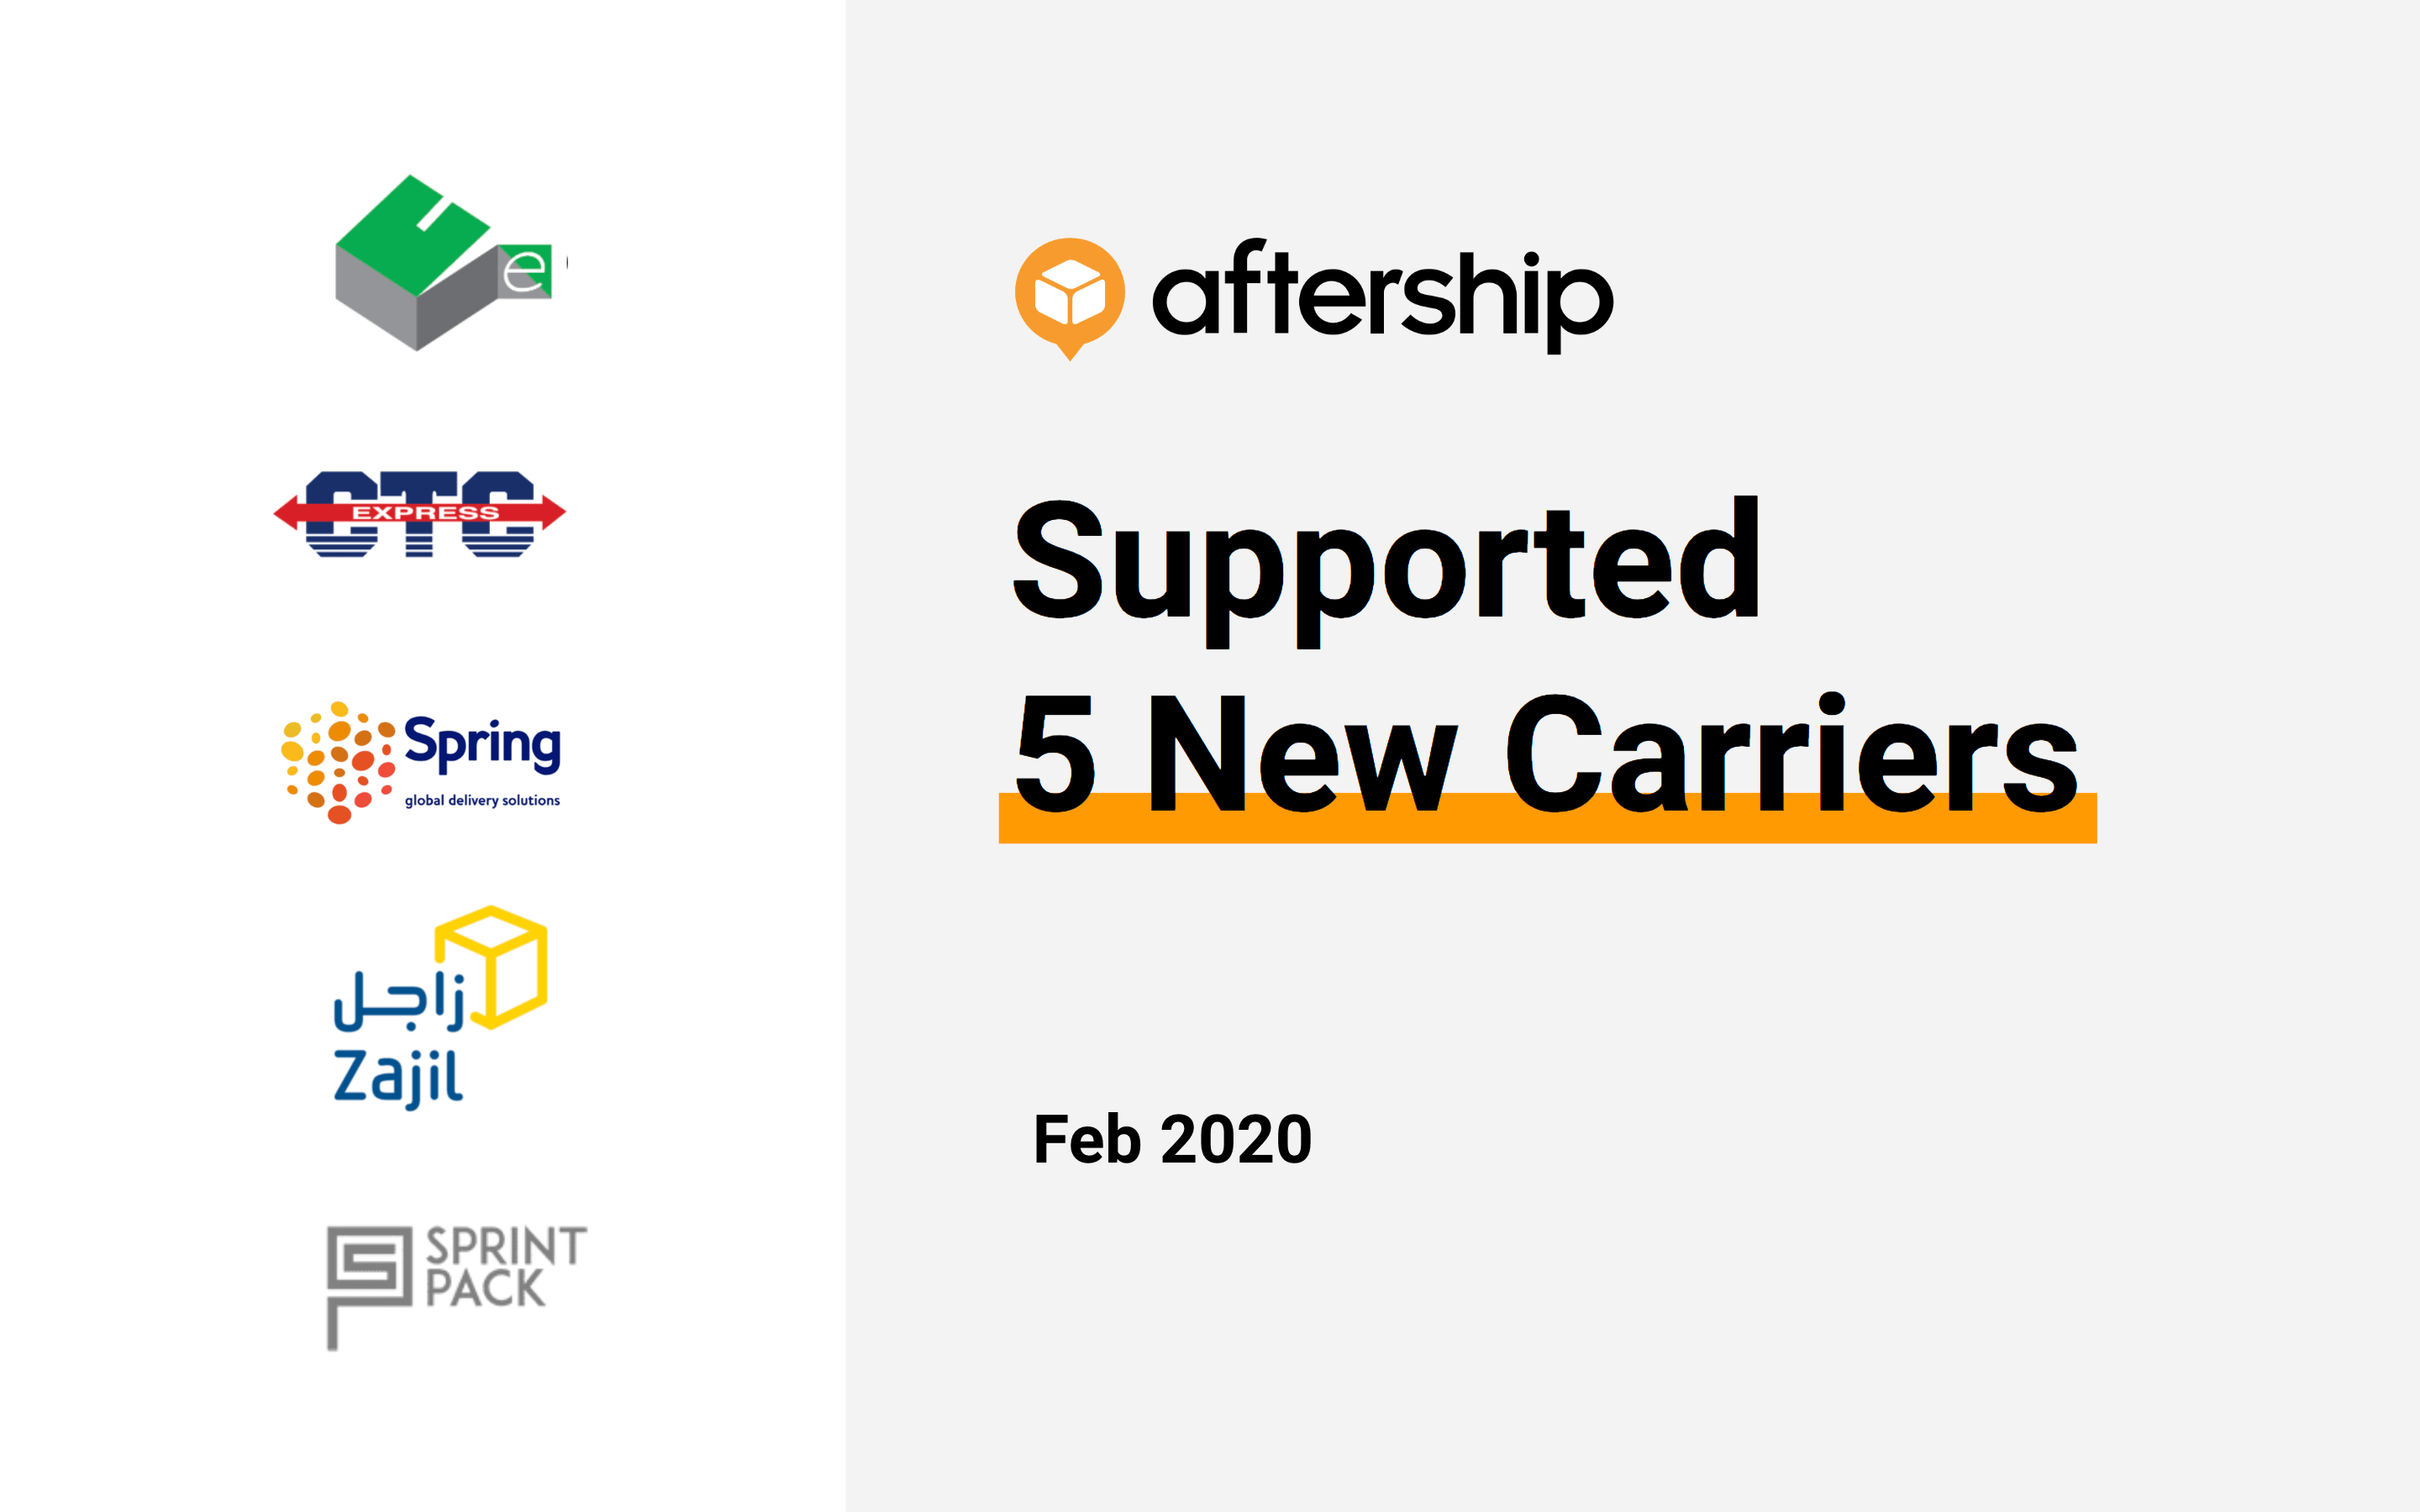 AfterShip just added 5 carries - Feb 2020